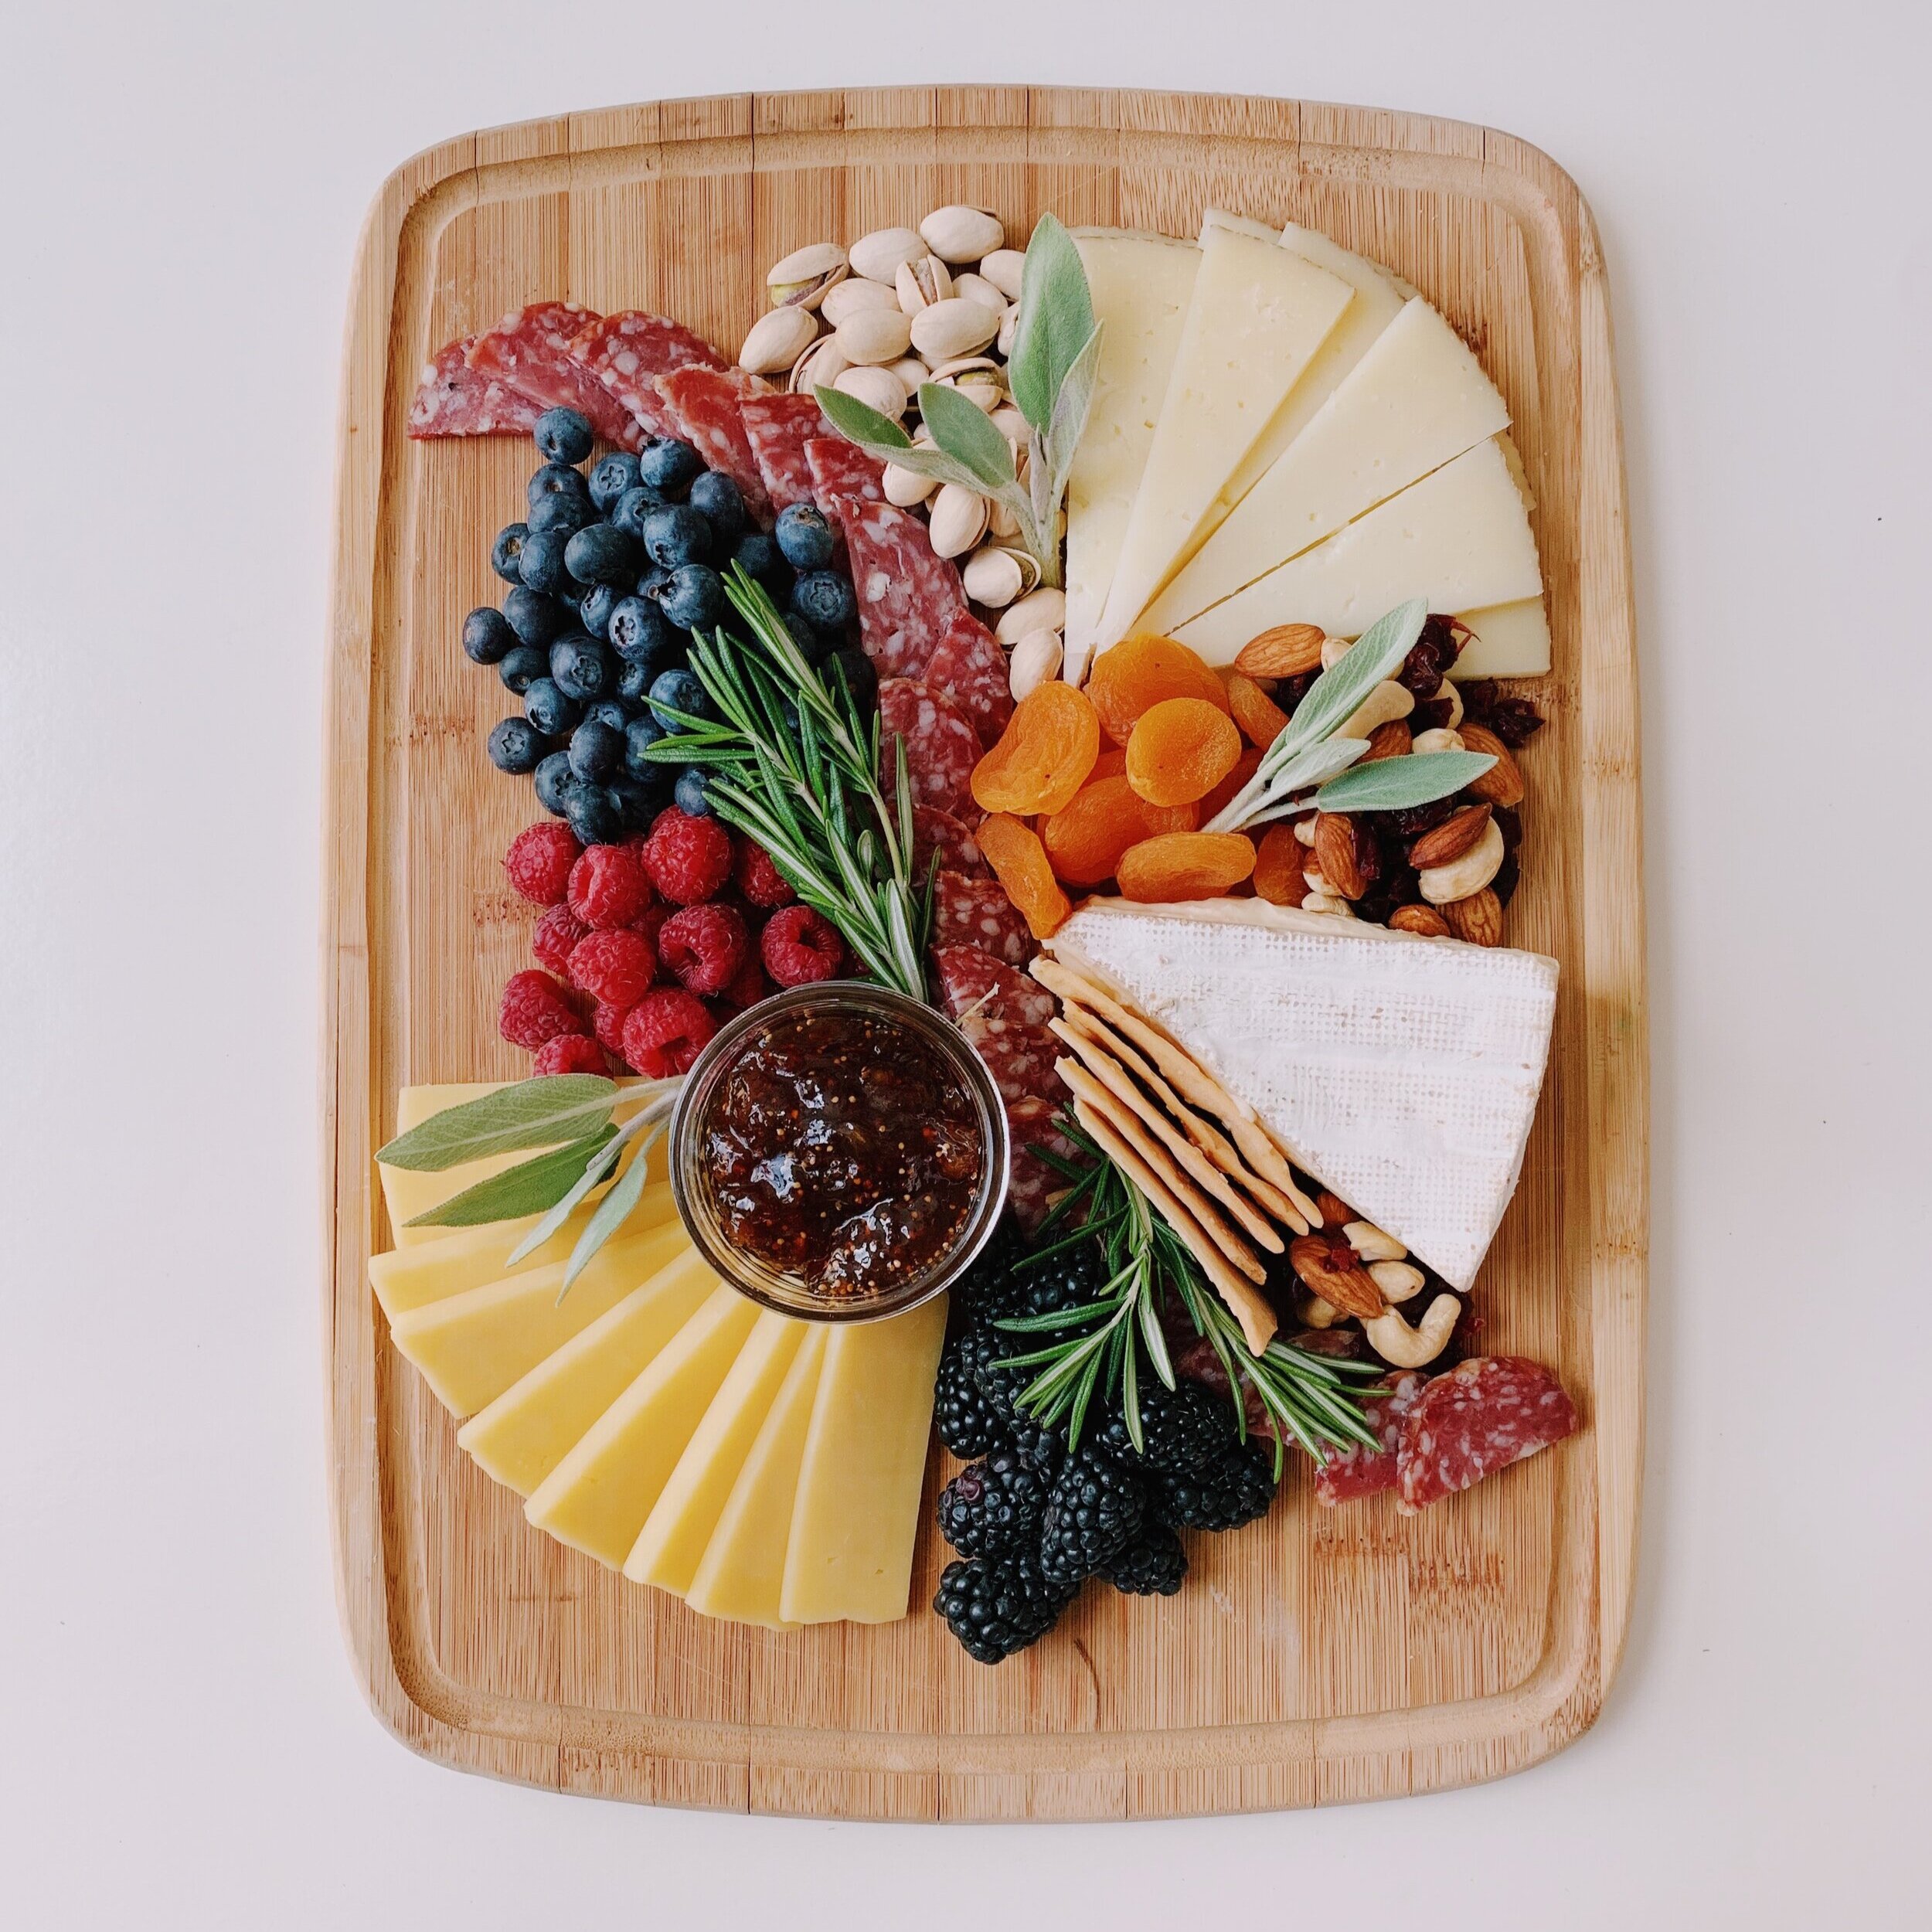 Unbeliavebly realistic Wood Effect Dishwasher Safe Break and Chip Resistant 21 x 11 Melamine Board Serving Tray Cheese Plate Oval 